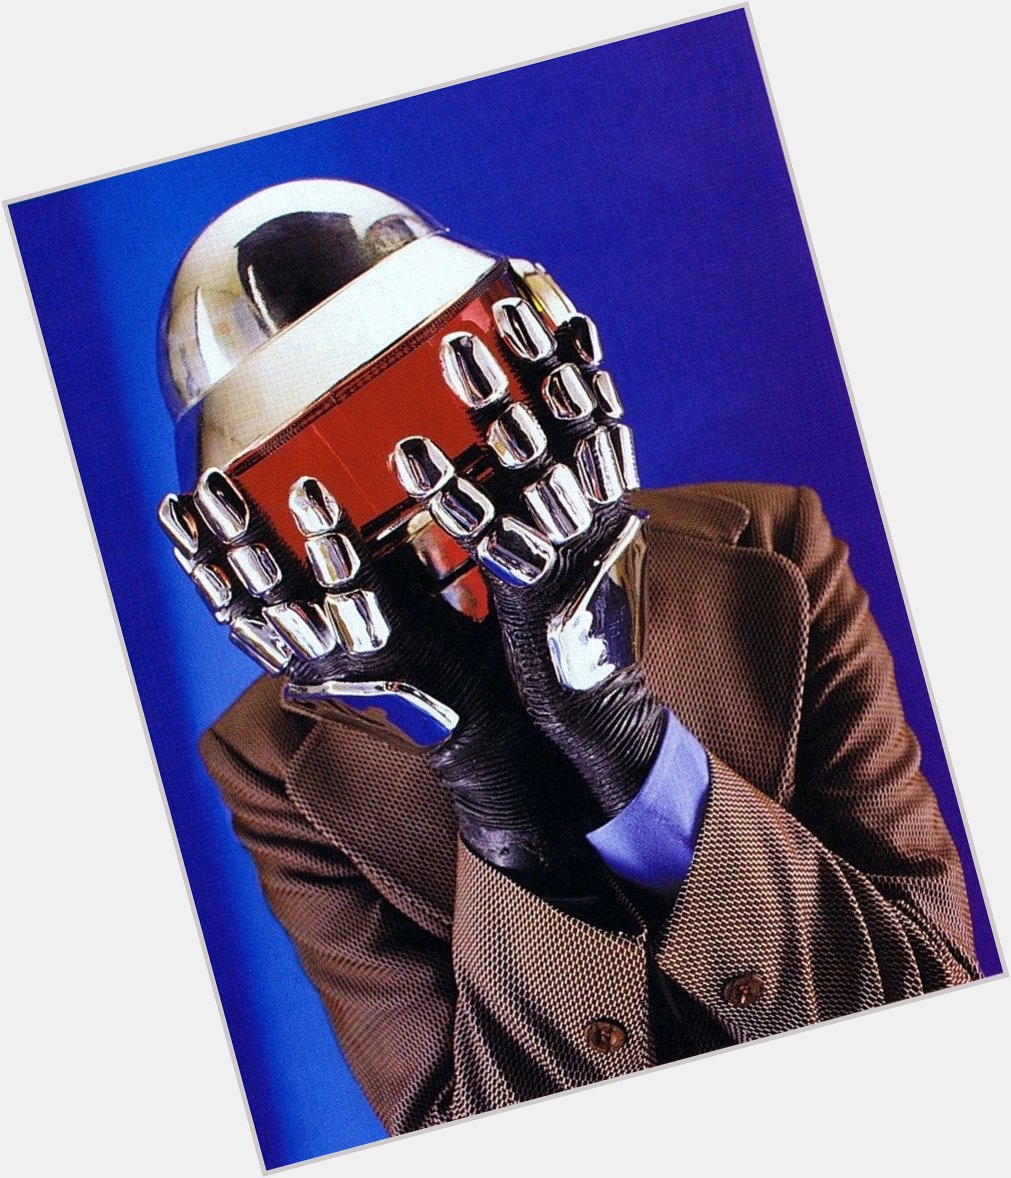 Happy 44th birthday to the one and only Thomas Bangalter     